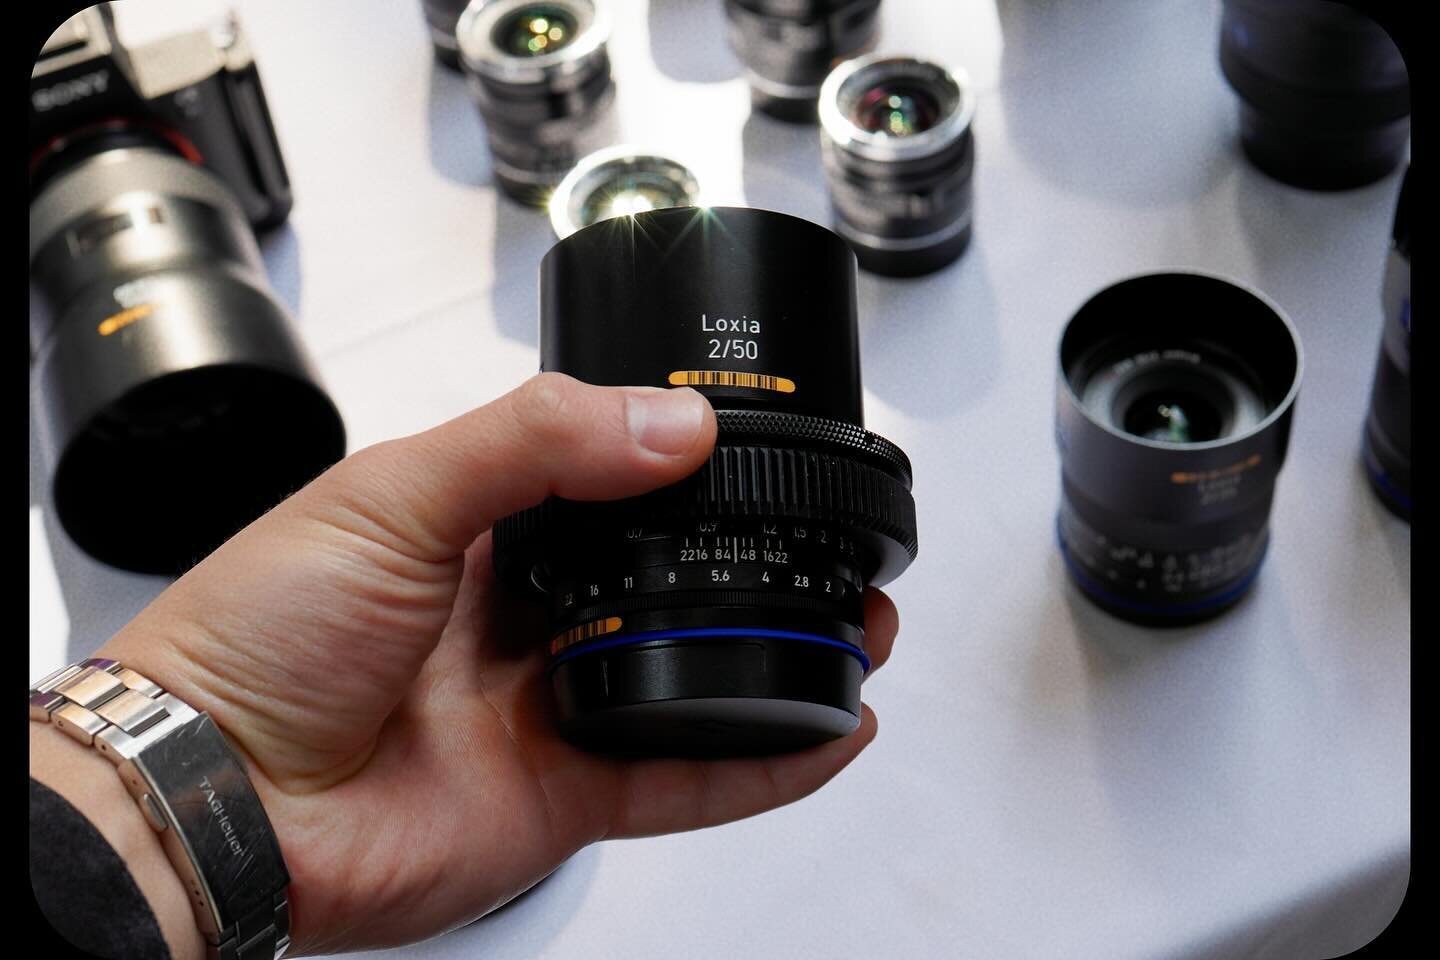 Camera gear is pretty sick - they had a whole bunch of it at Cinegear!
-
I made a recap video about what I thought was cool.
Check it out bio.
-
#loxia #zeiss #videoproduction #filmmaking #cinegearexpo #cinegear #nyfilmmaker